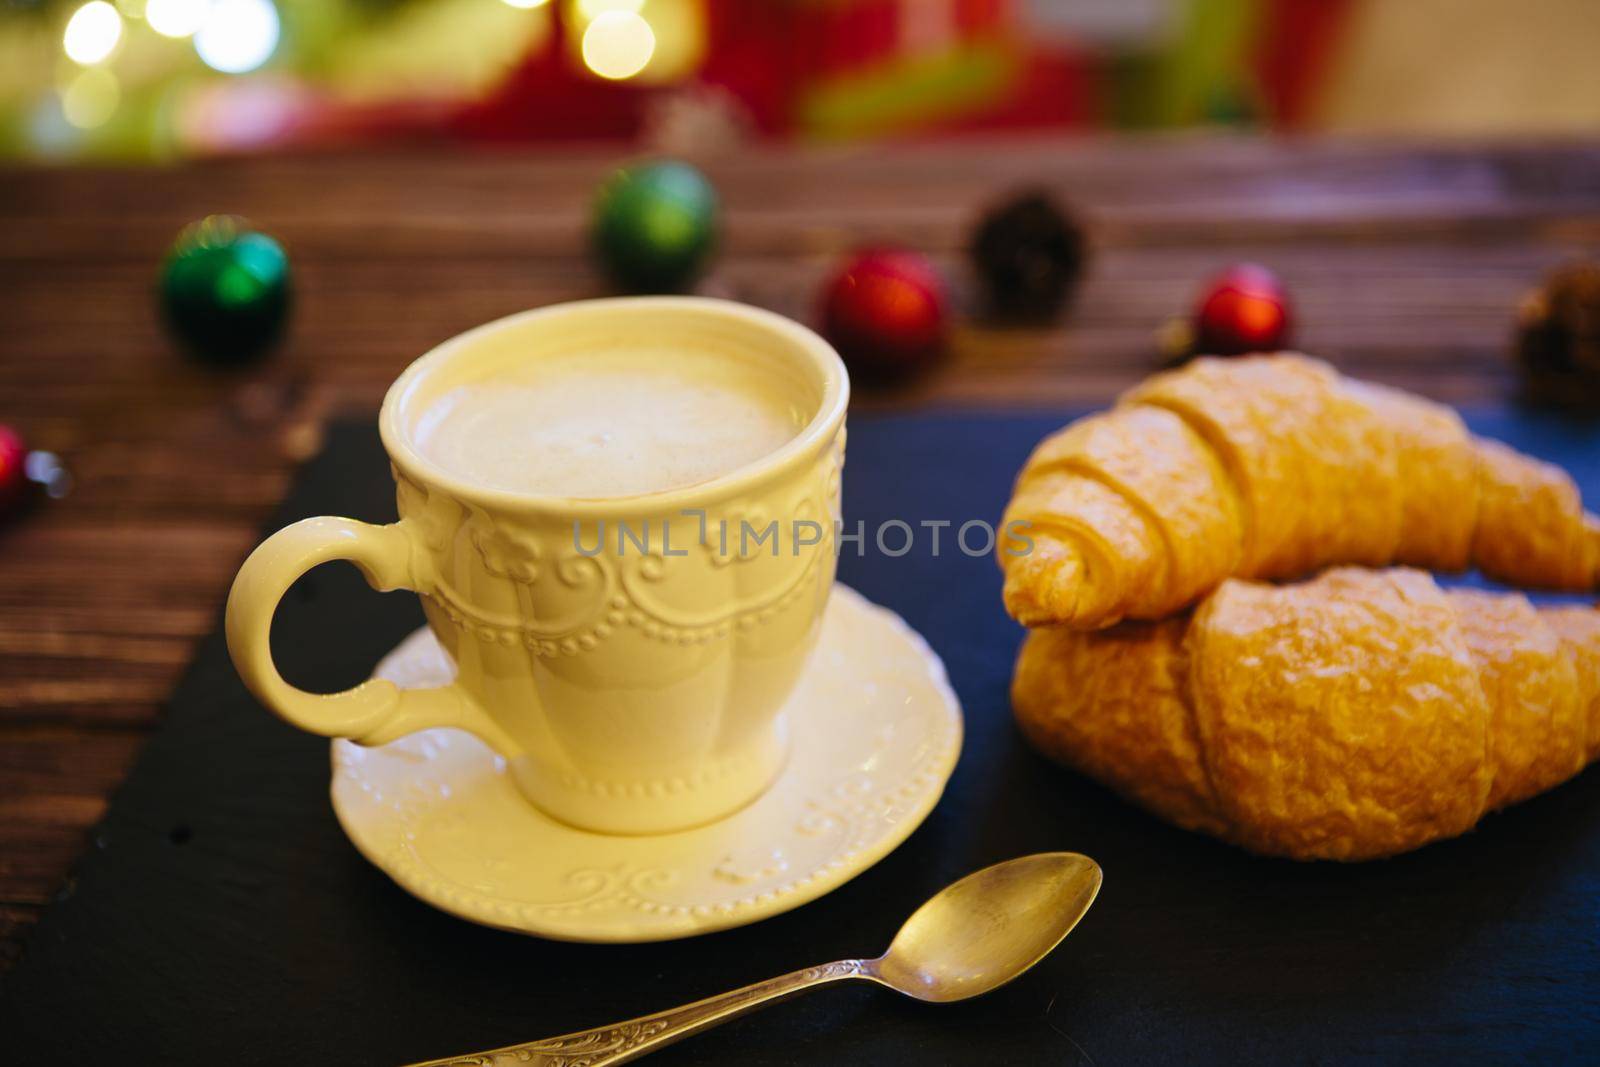 Mug with hot chocolate on a wooden table with Christmas decorations .